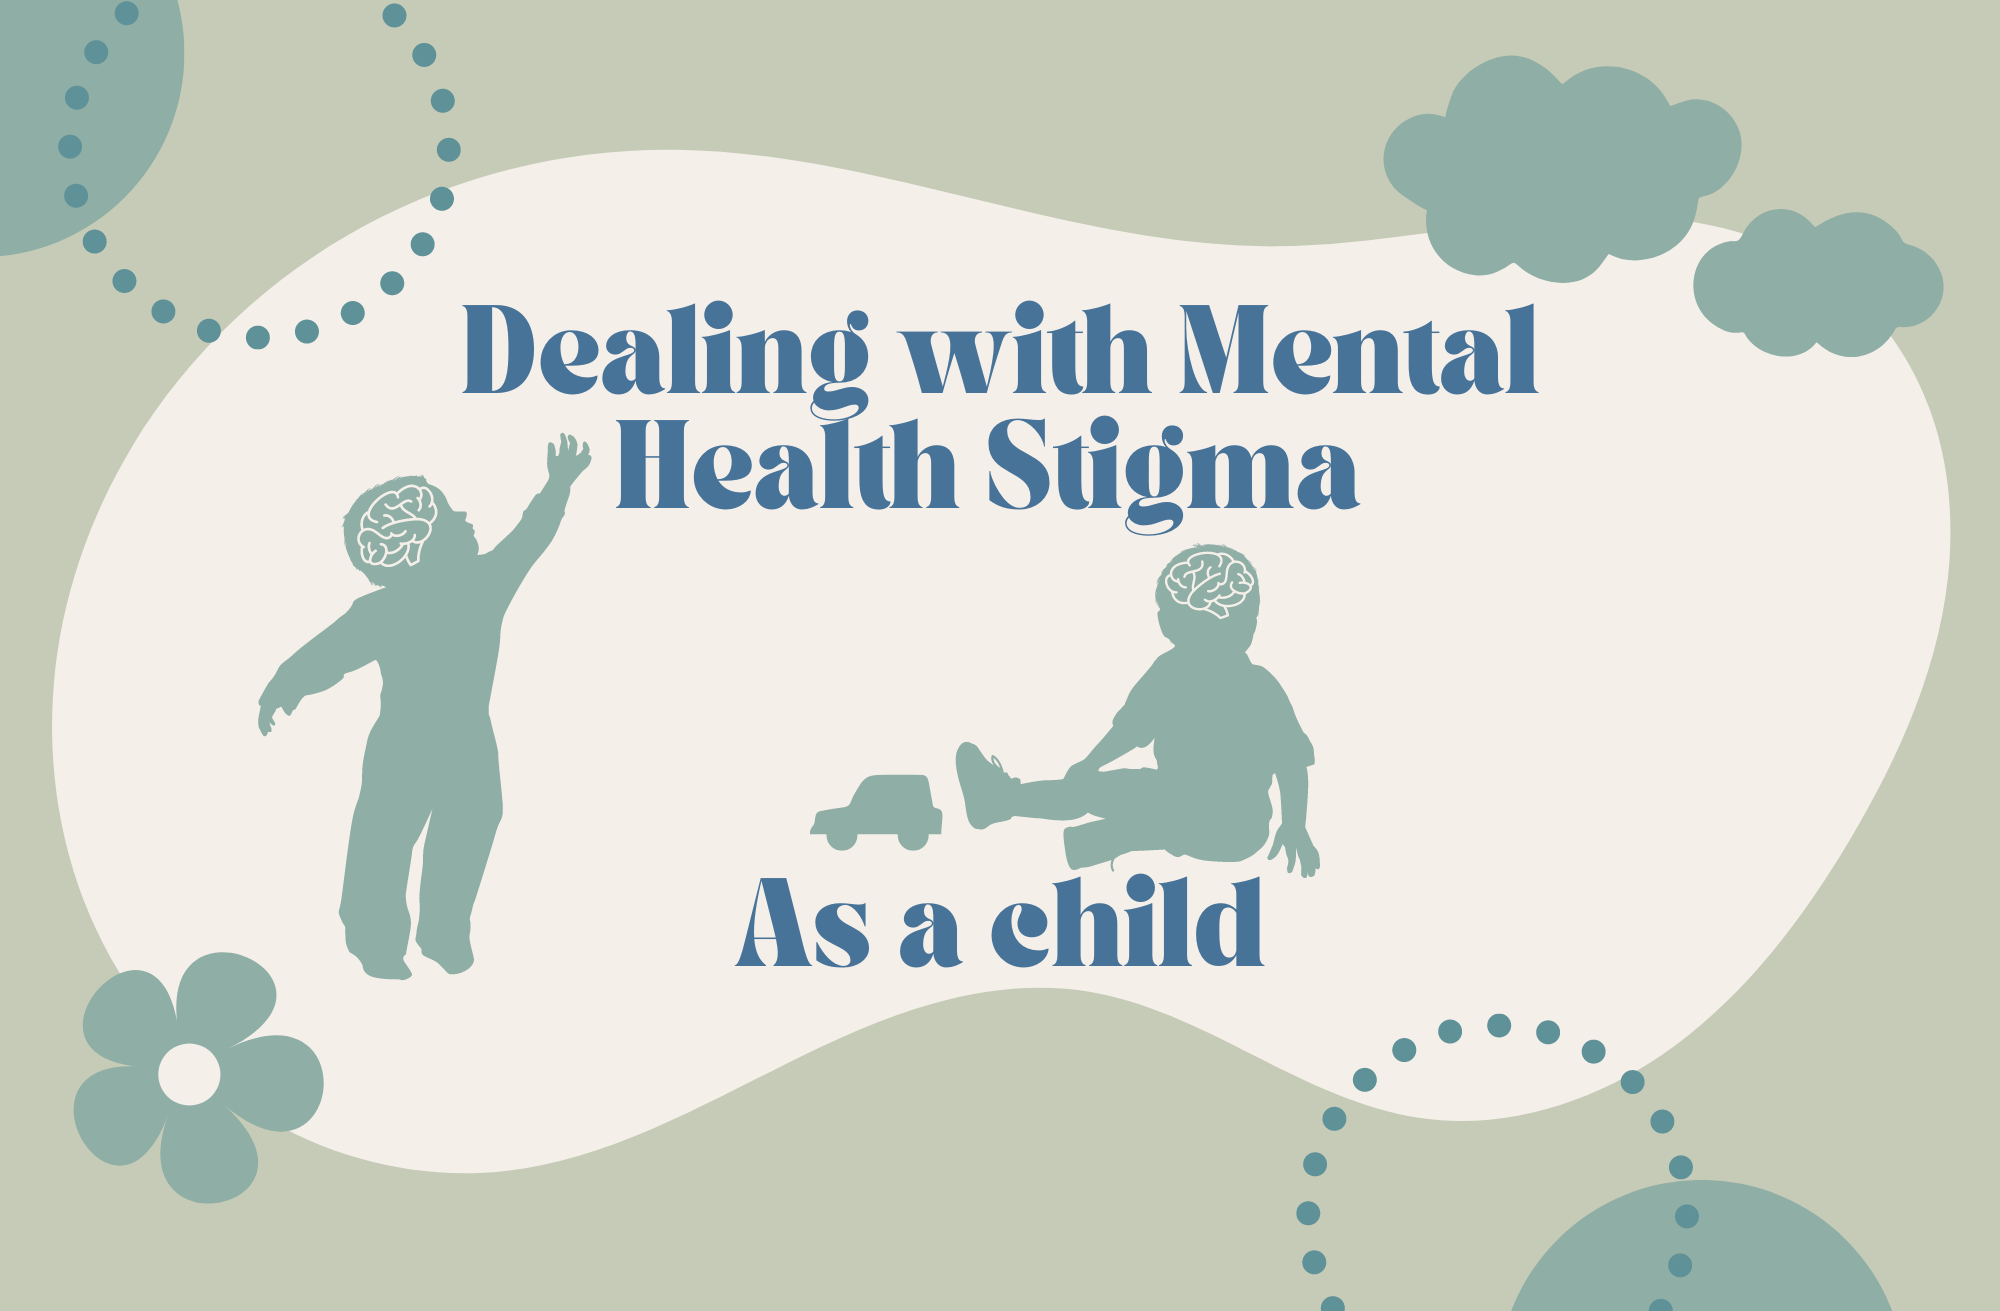 Dealing with Mental Health Stigma as a child